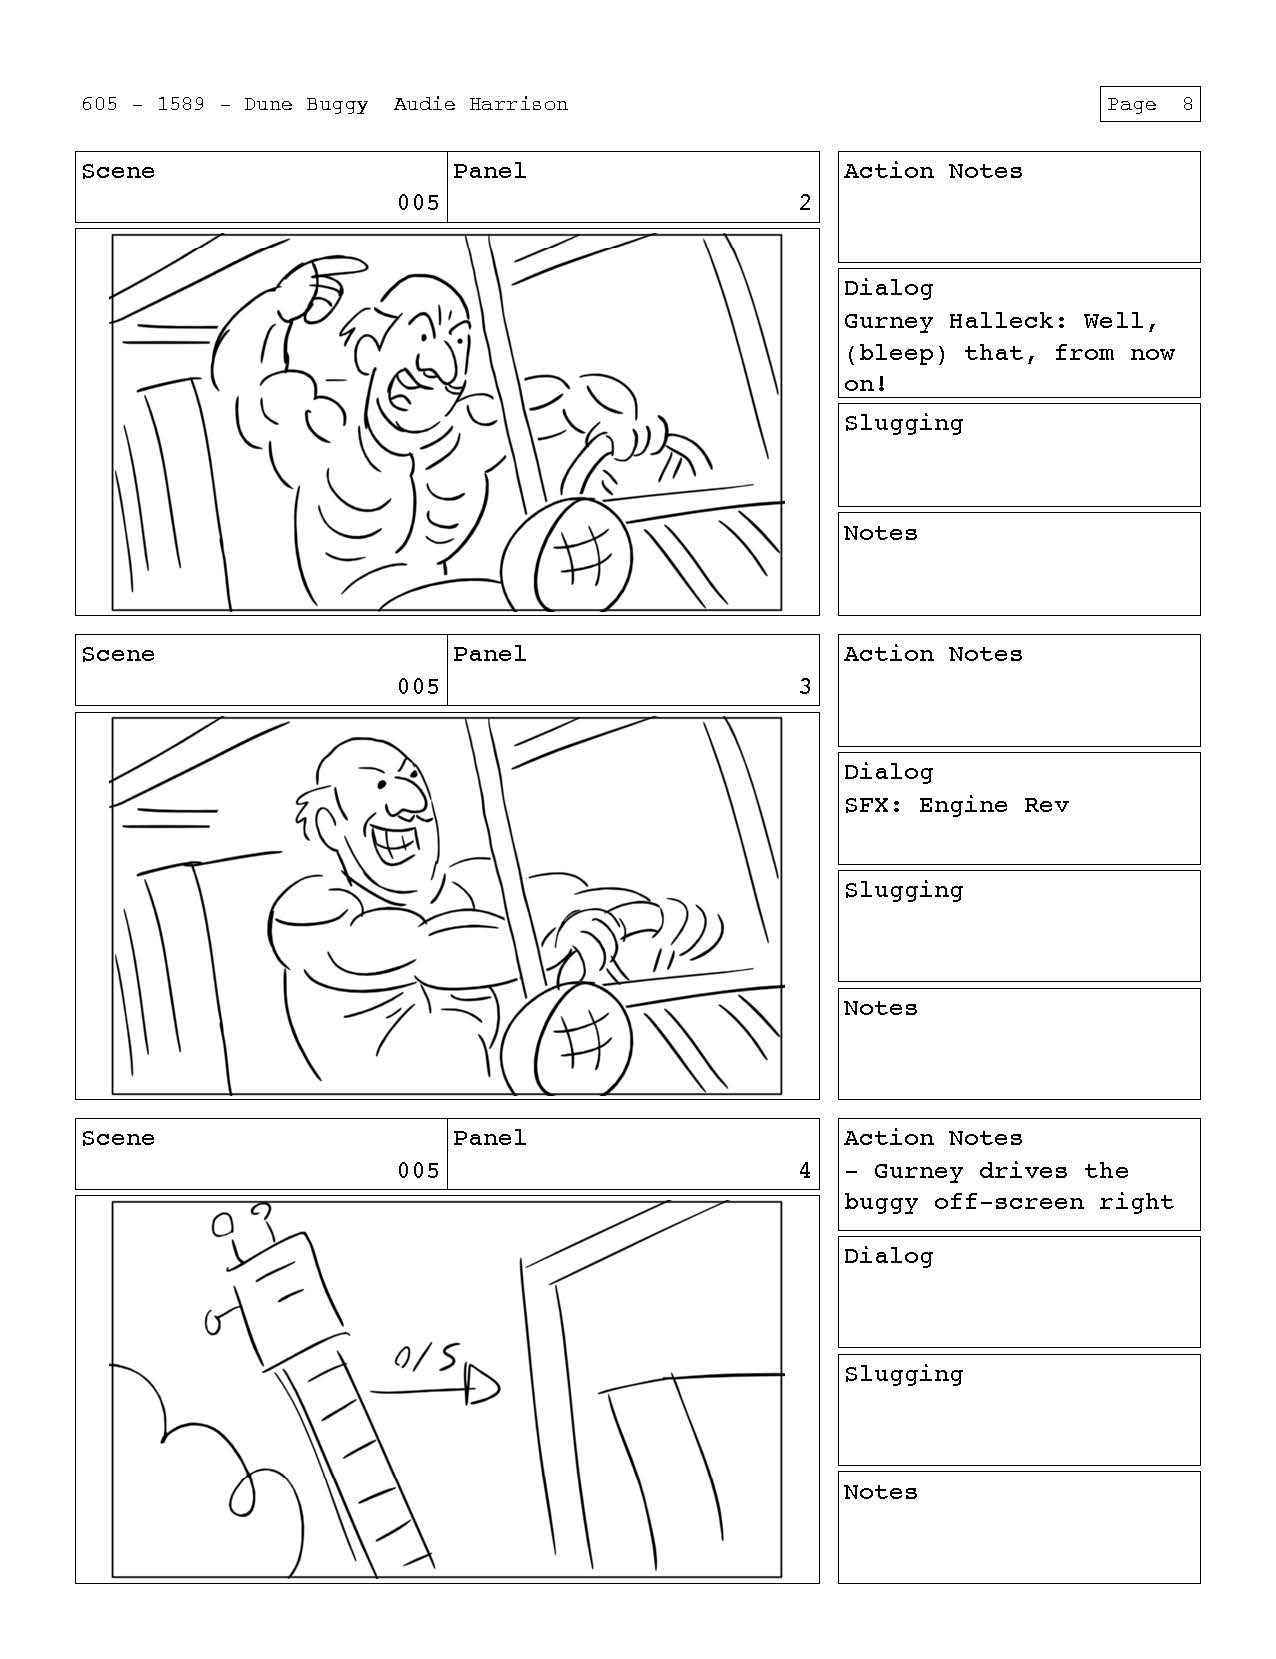 Dune_Buggy_Page_09.jpg